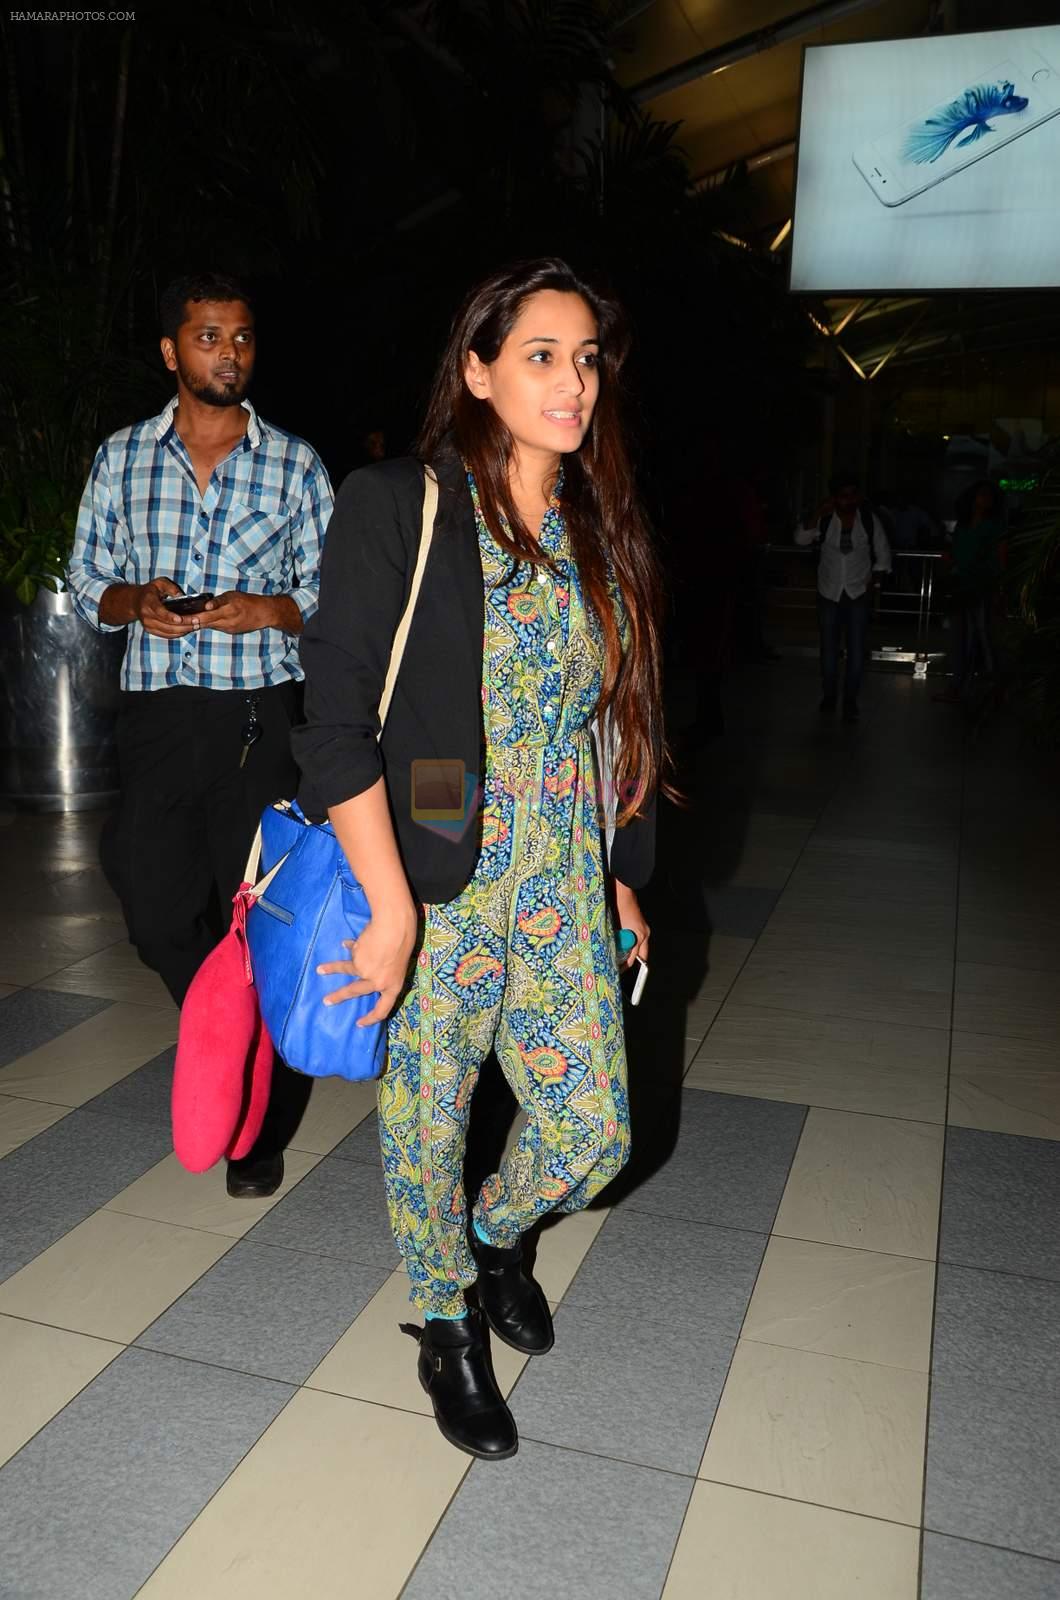 Shweta Pandit snapped at airport on 28th Oct 2015